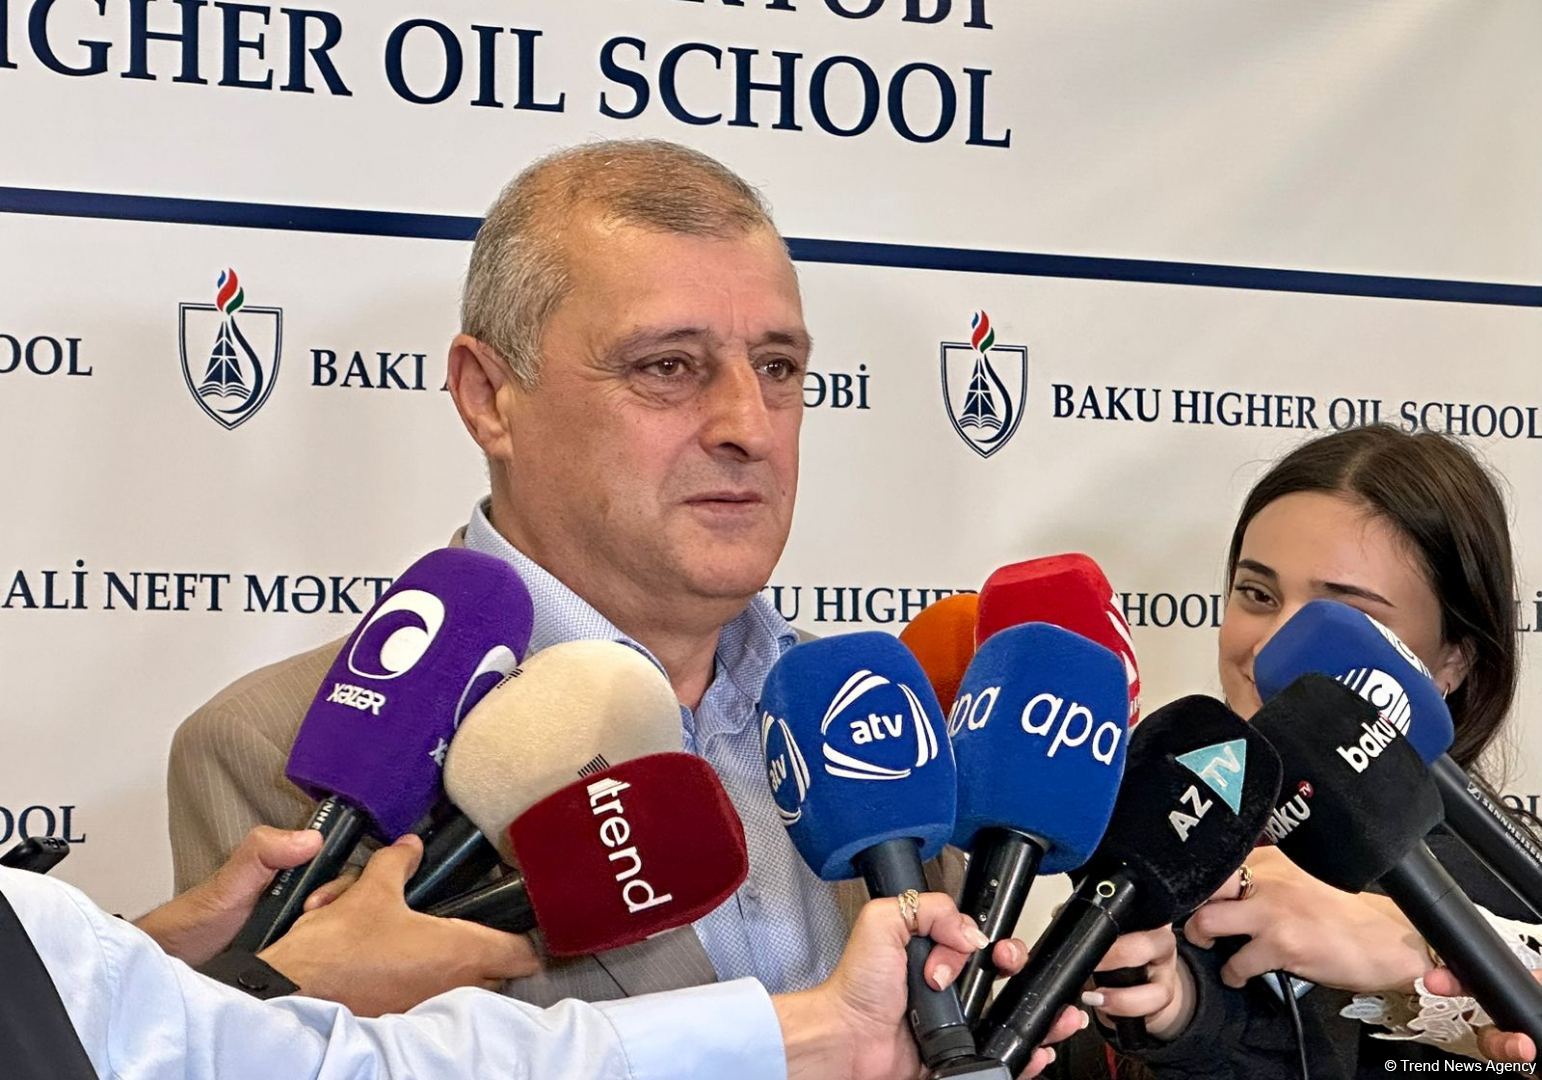 Women sappers to actively participate in demining work in Azerbaijan - AzCBL's chairman